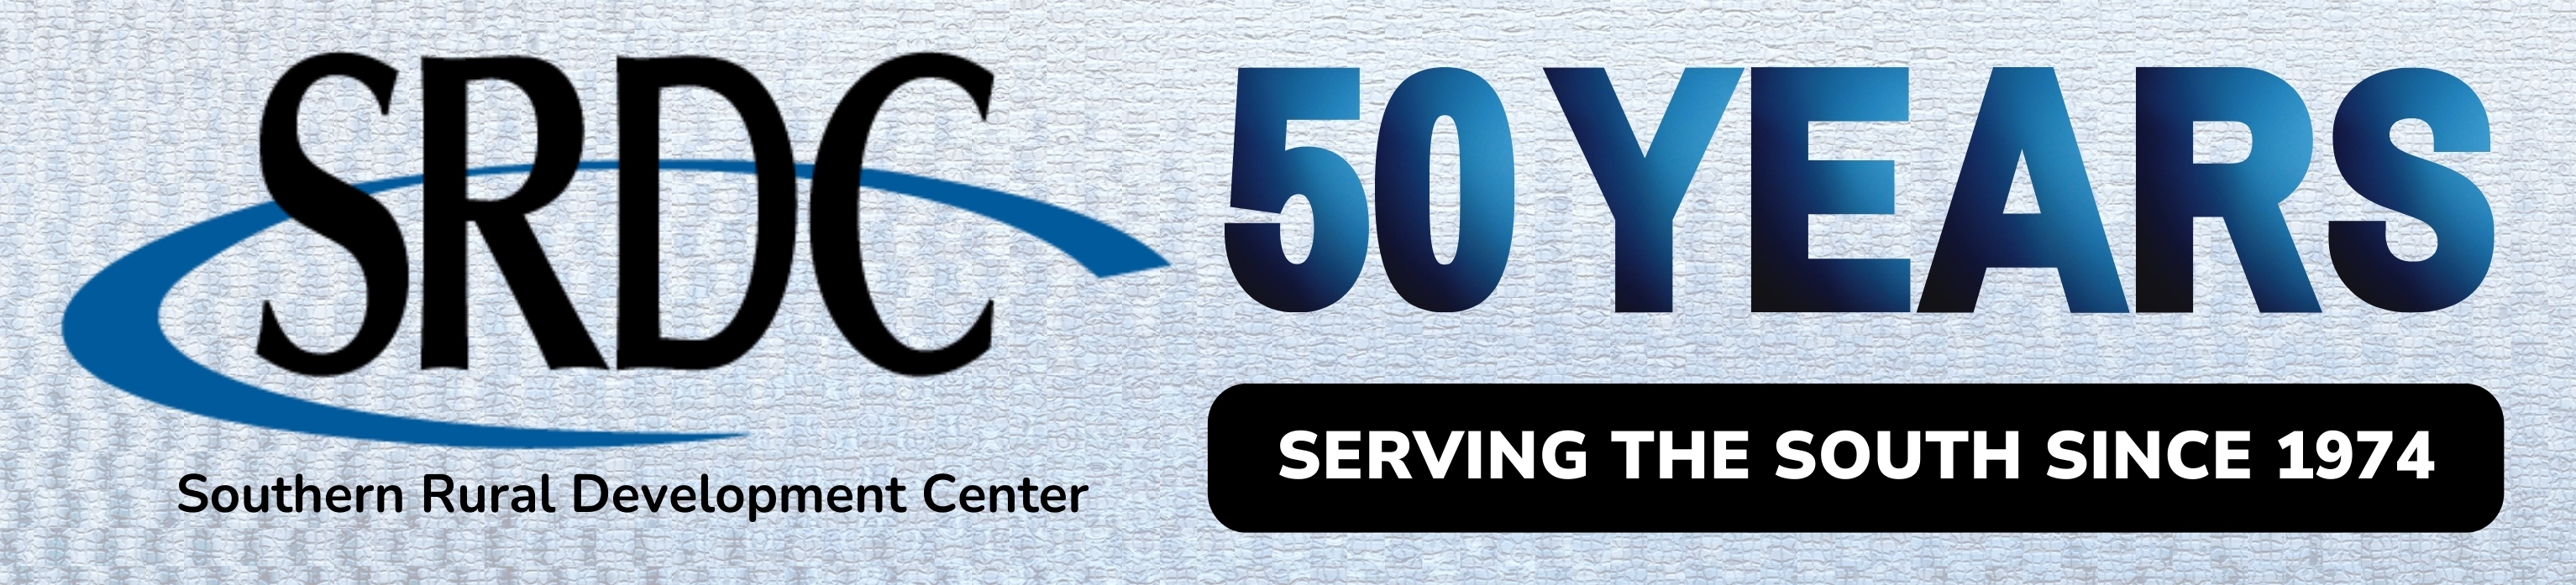 southern rural development center 50 years serving the south since 1974